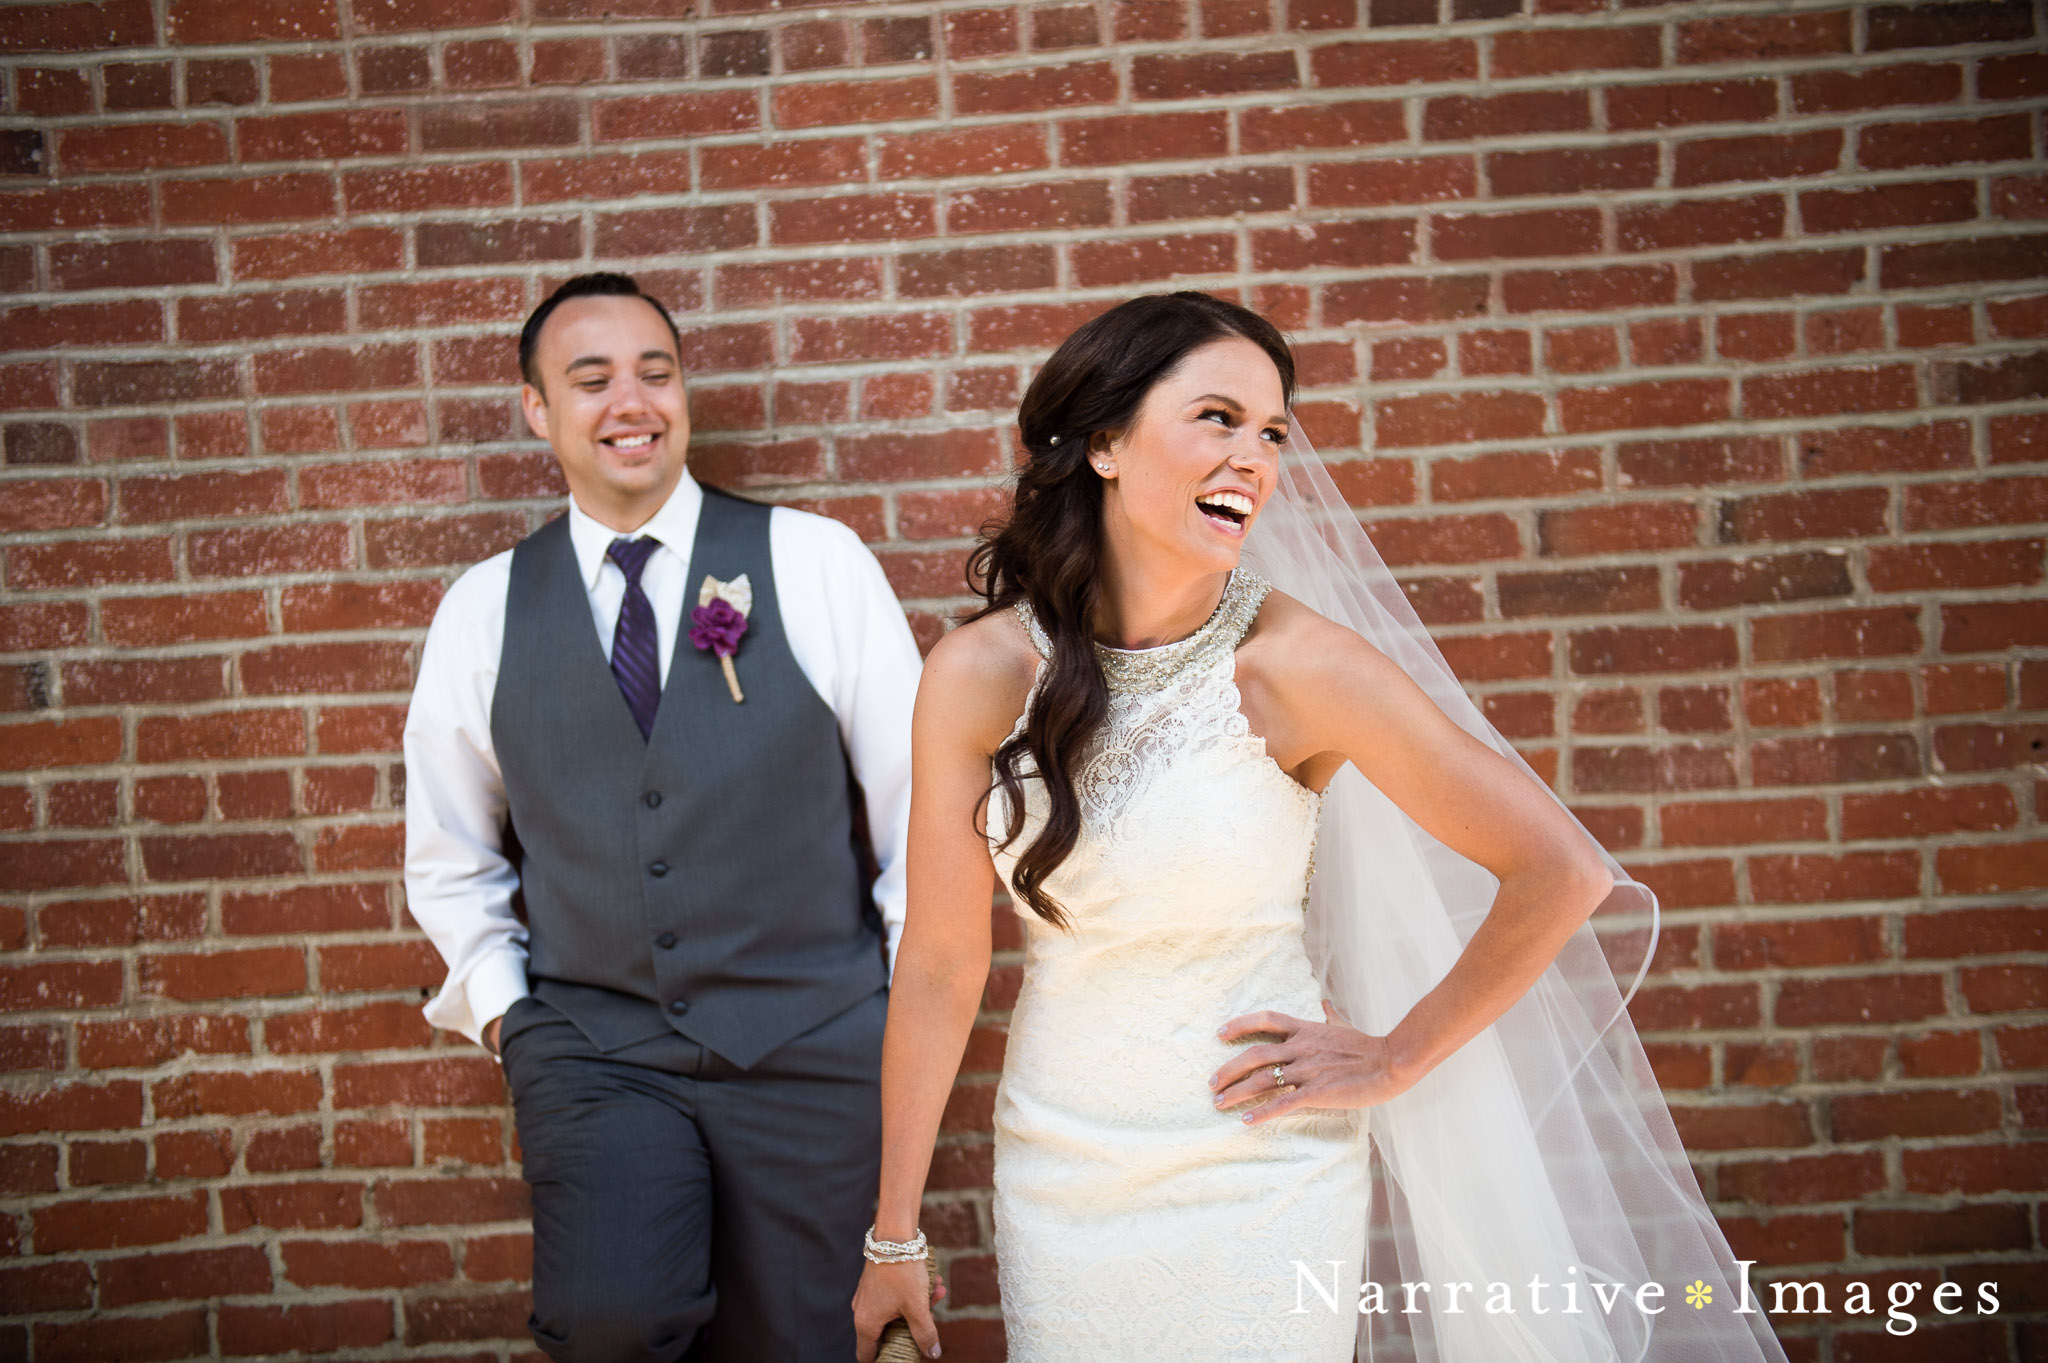 Bride laughing with Groom in background standing against brick wall in downtown temecula